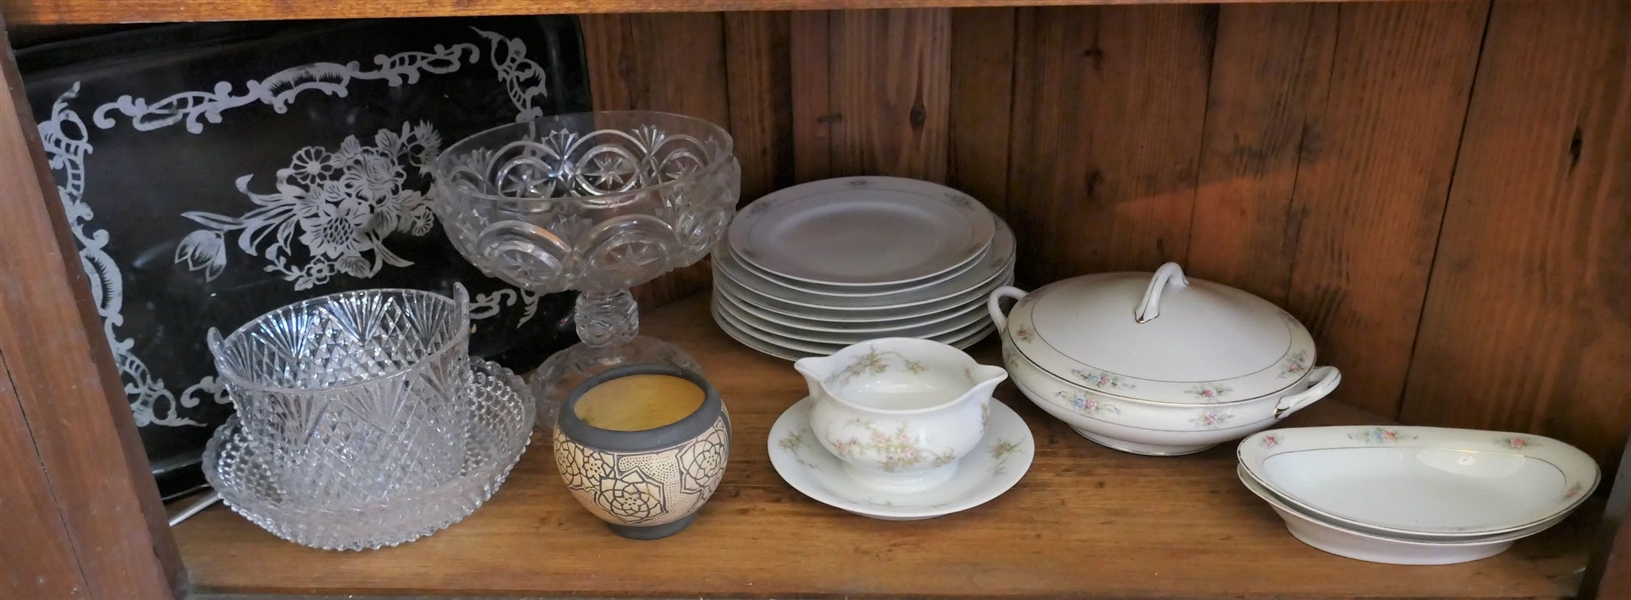 Shelf Lot including Hand Painted Nippon China and Covered Bowl, Early American Press Glass Compote, Diamond Point Ice Bucket and Bowl, and Art Pottery